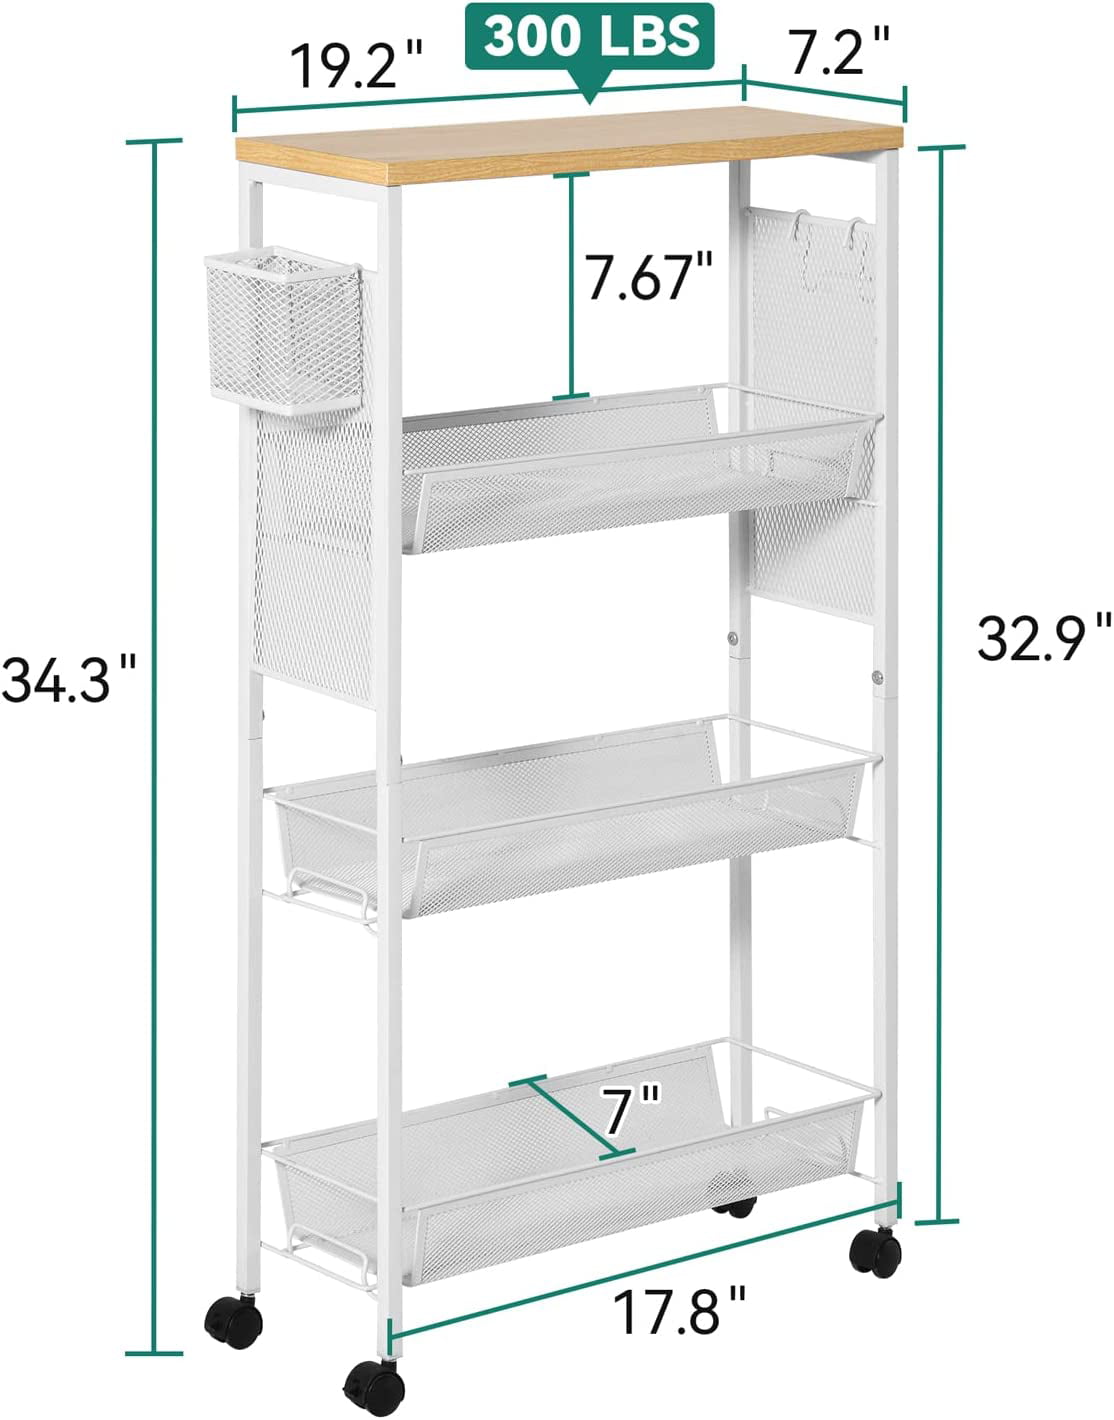 YITAHOME 4-Tier Slim Rolling Cart， Kitchen Cart with Wheels， Storage Cart with Wooden Tabletop and Mesh Baskets， Mobile Utility Cart for Narrow Space for Kitchen， Bathroom， Laundry Room，White